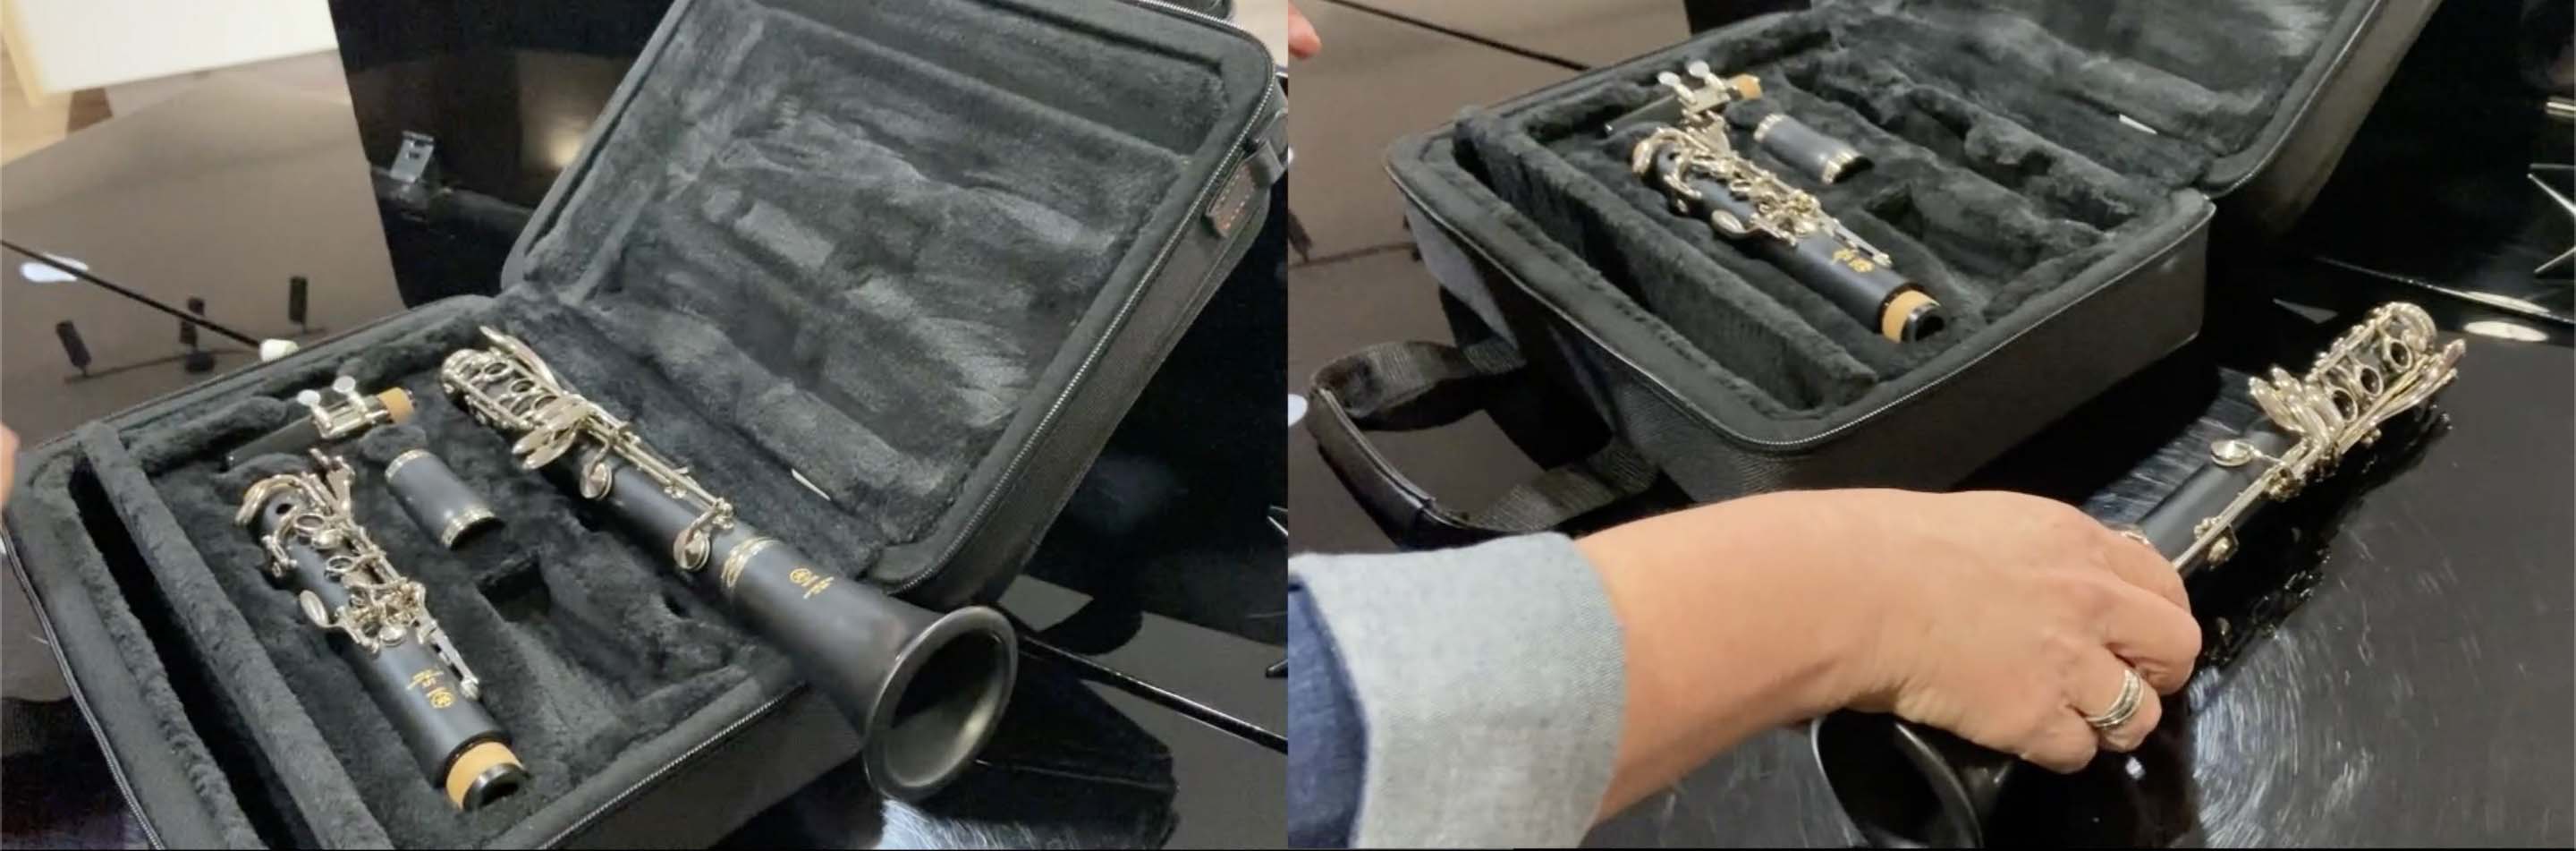 Two images side by side. On the left side, the bell and bottom joint has been placed onto the open case. On the right side, the bell and bottom joint is sitting on the piano next to the open case.